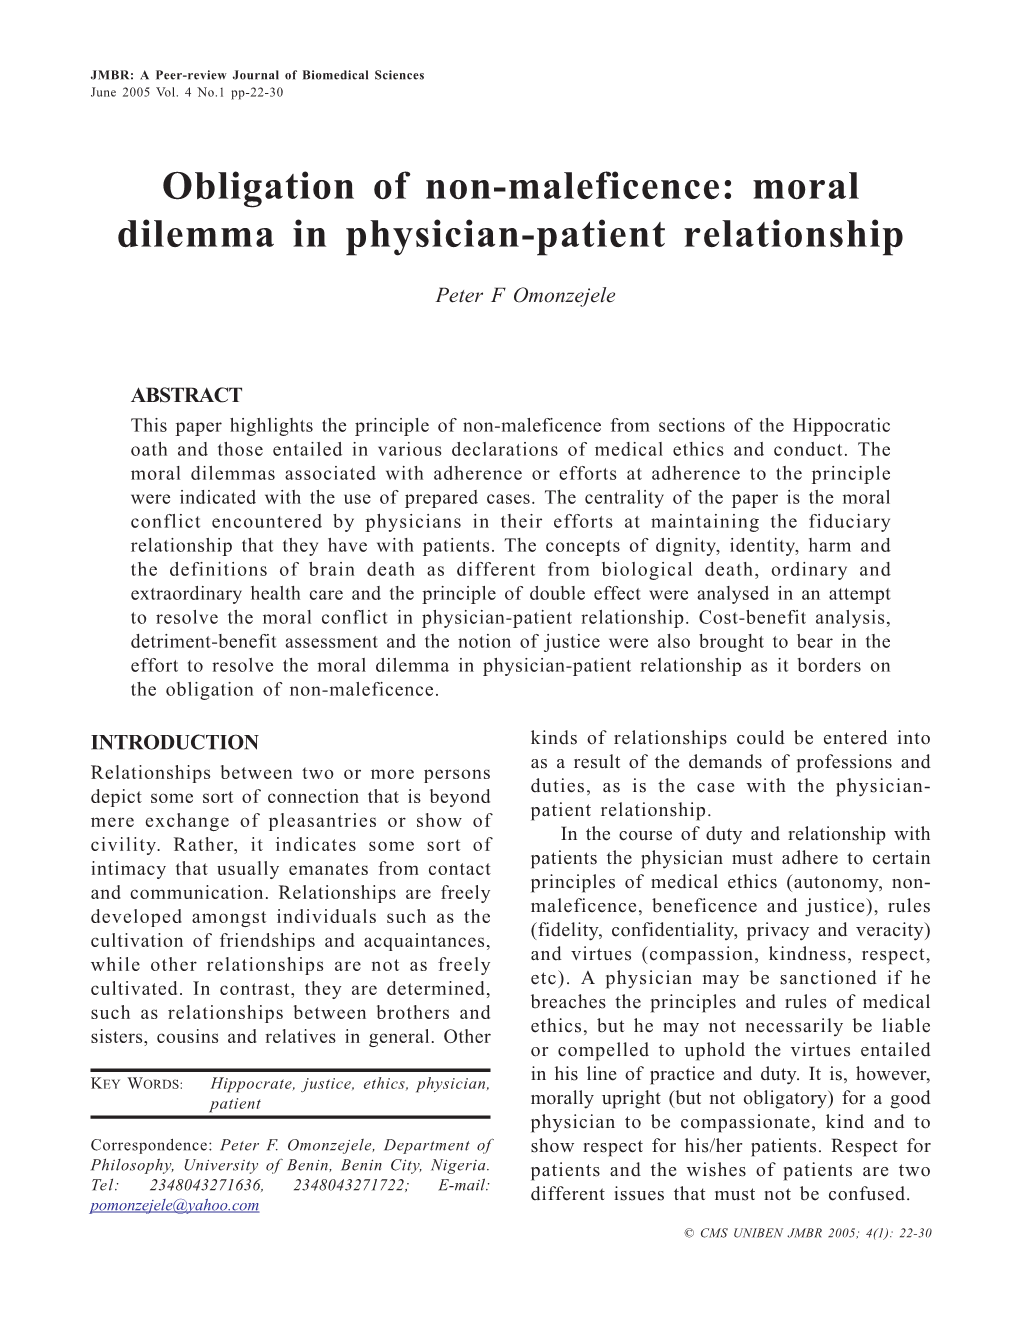 Obligation of Non-Maleficence: Moral Dilemma in Physician-Patient Relationship